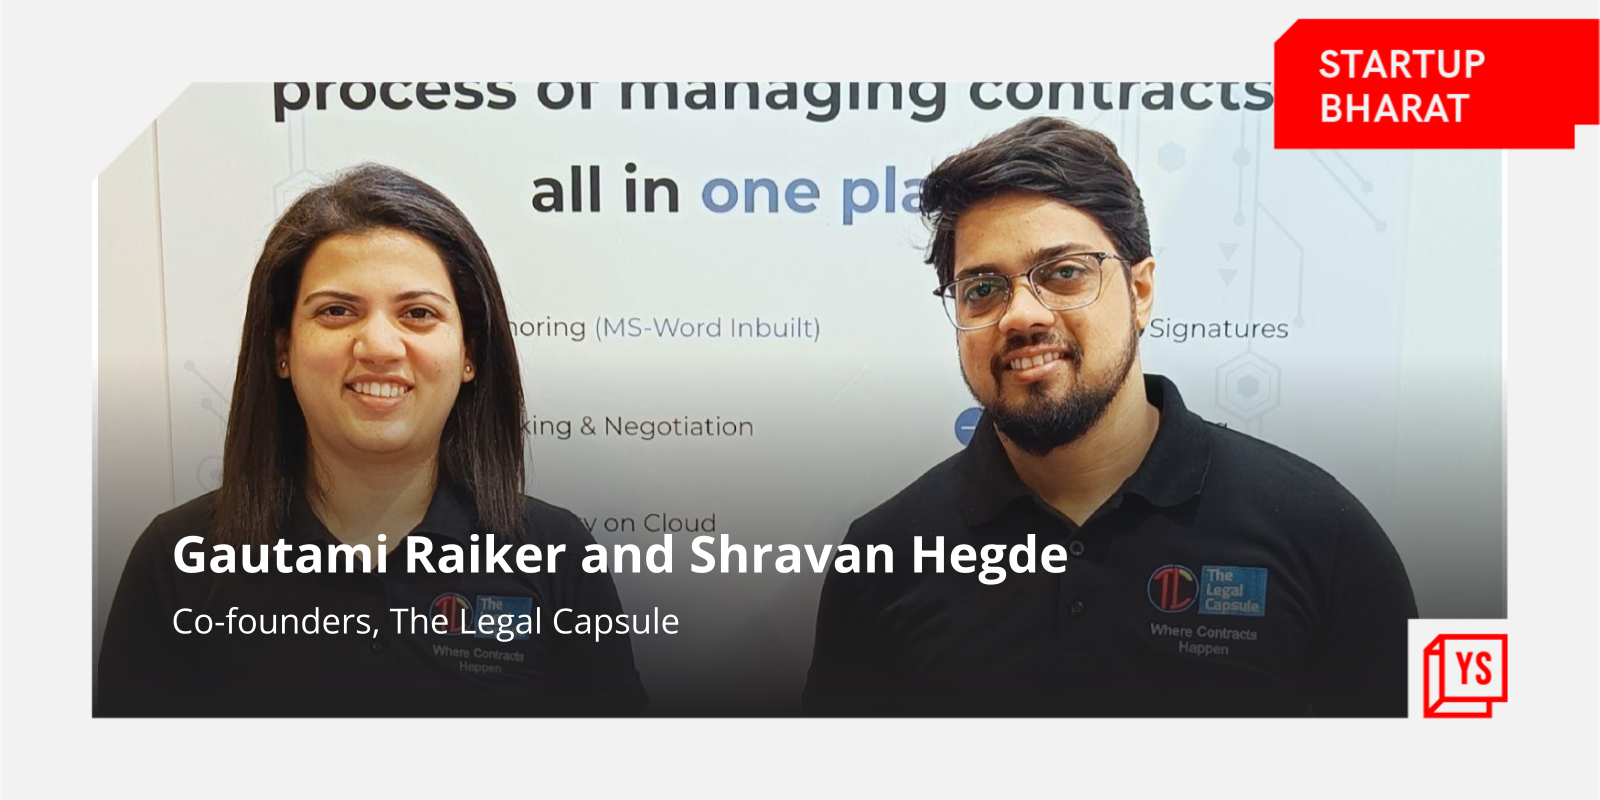 [Startup Bharat] This legaltech firm is helping companies automate contract management with its AI/ML solution